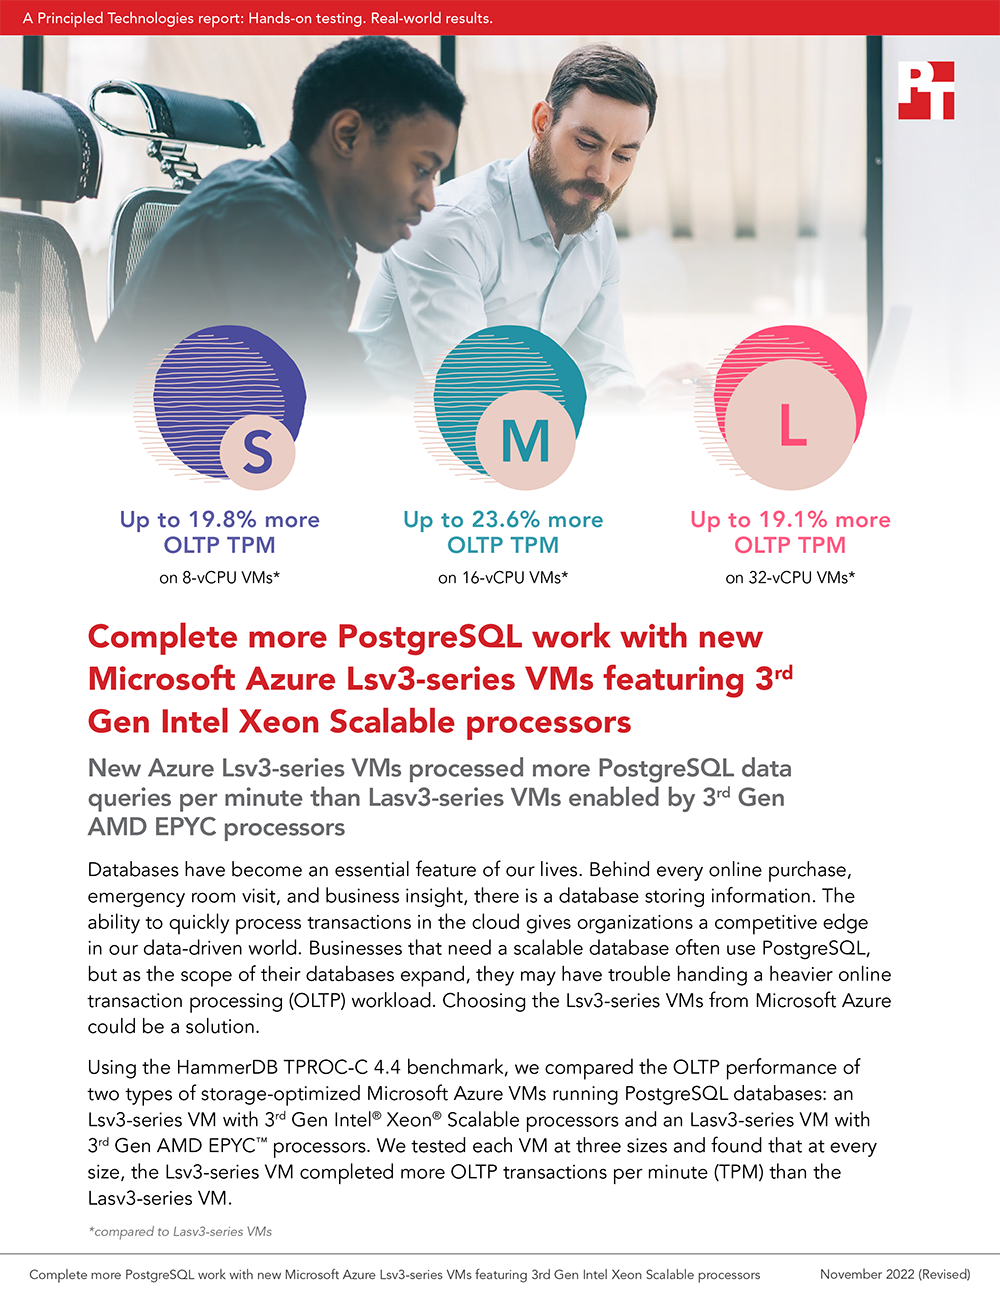 Complete more PostgreSQL work with new Microsoft Azure Lsv3-series VMs featuring 3rd Gen Intel Xeon Scalable processors